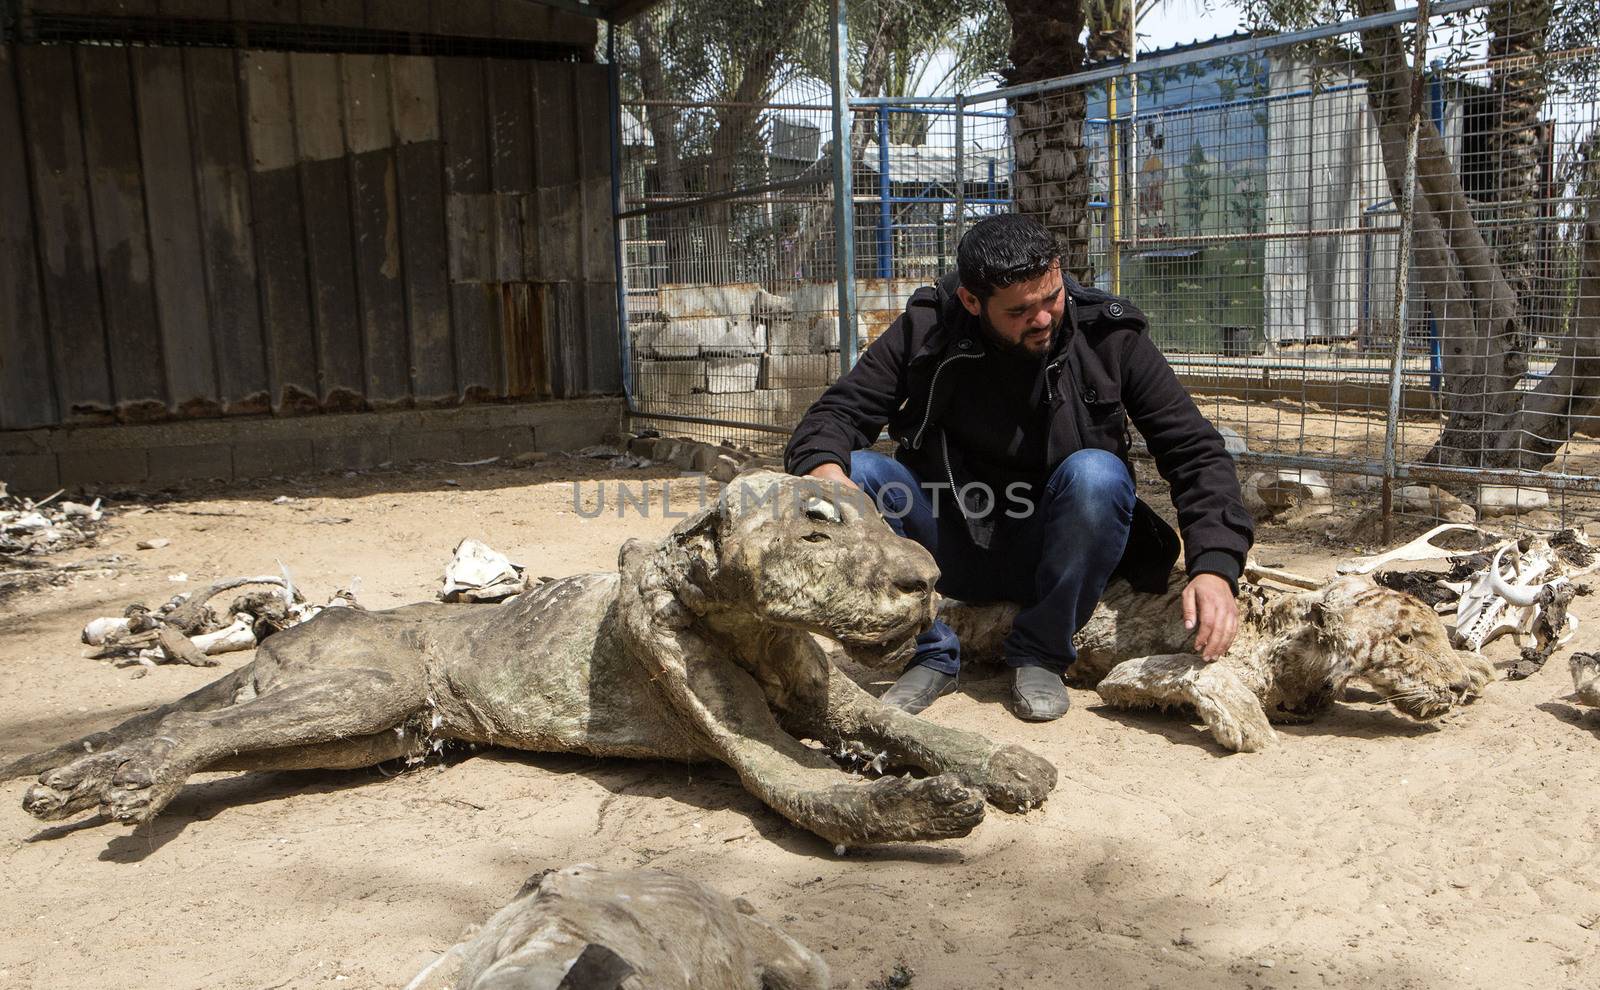 GAZA STRIP, Khan Younis: Palestinian zoo owner Mohammad Oweida shows stuffed animals that died during the 2014 war, at the Khan Younis Zoo, southern Gaza Strip, on March 15, 2016. Around 200 animals have starved to death in the zoo since a seven-week war between Israel and Palestinian militants in 2014. Oweida has stuffed 15 of them and now has to sell  the survivors in order to save them.